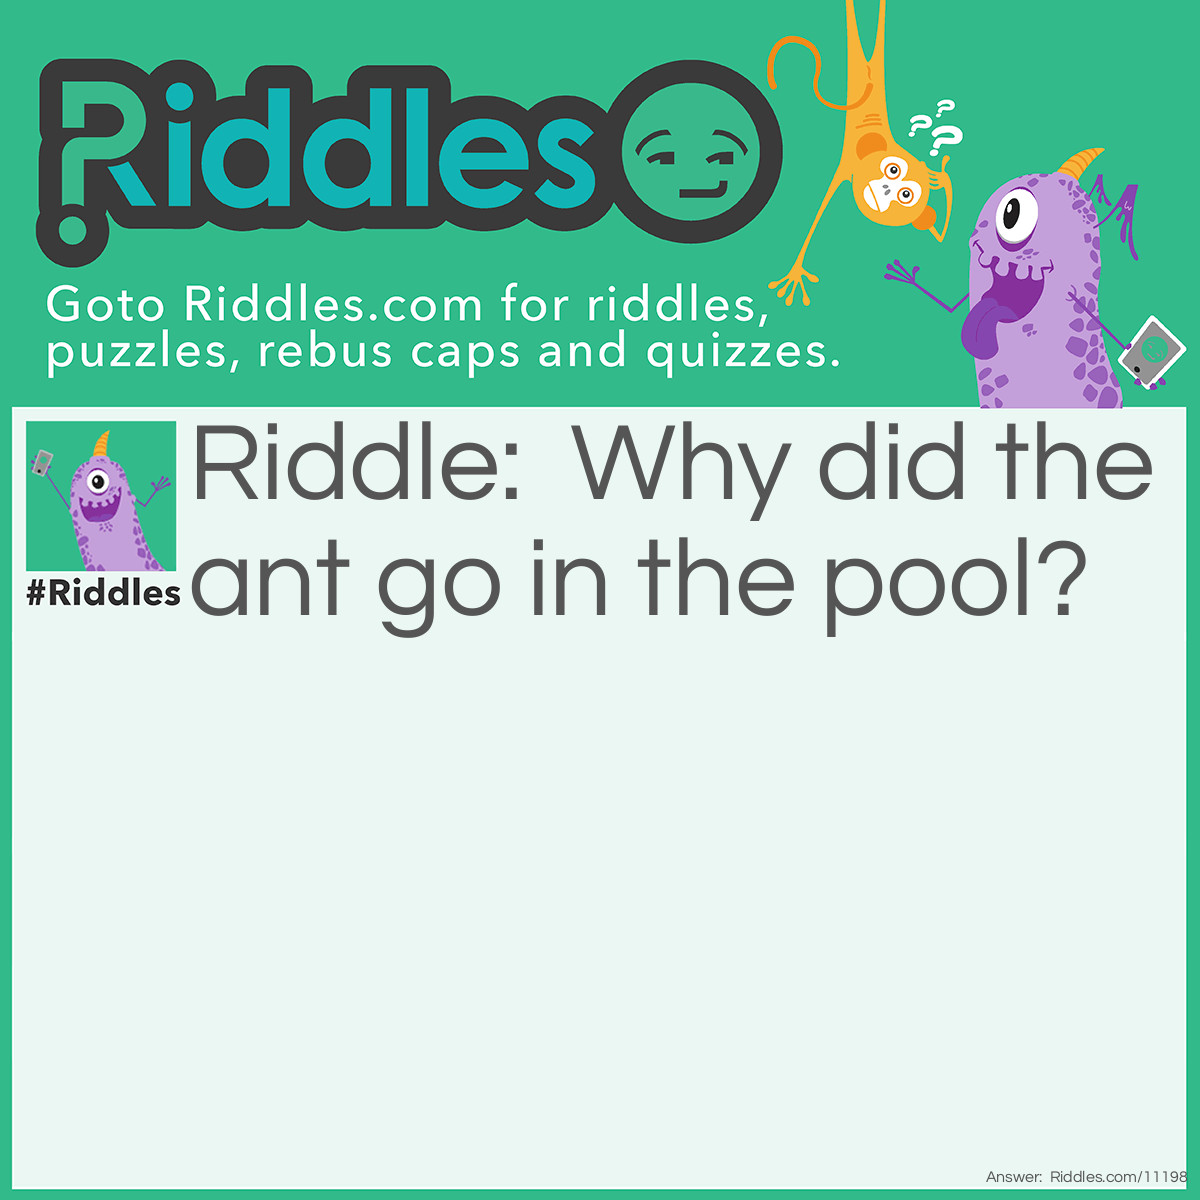 Riddle: Why did the ant go in the pool? Answer: Cause it was retired!